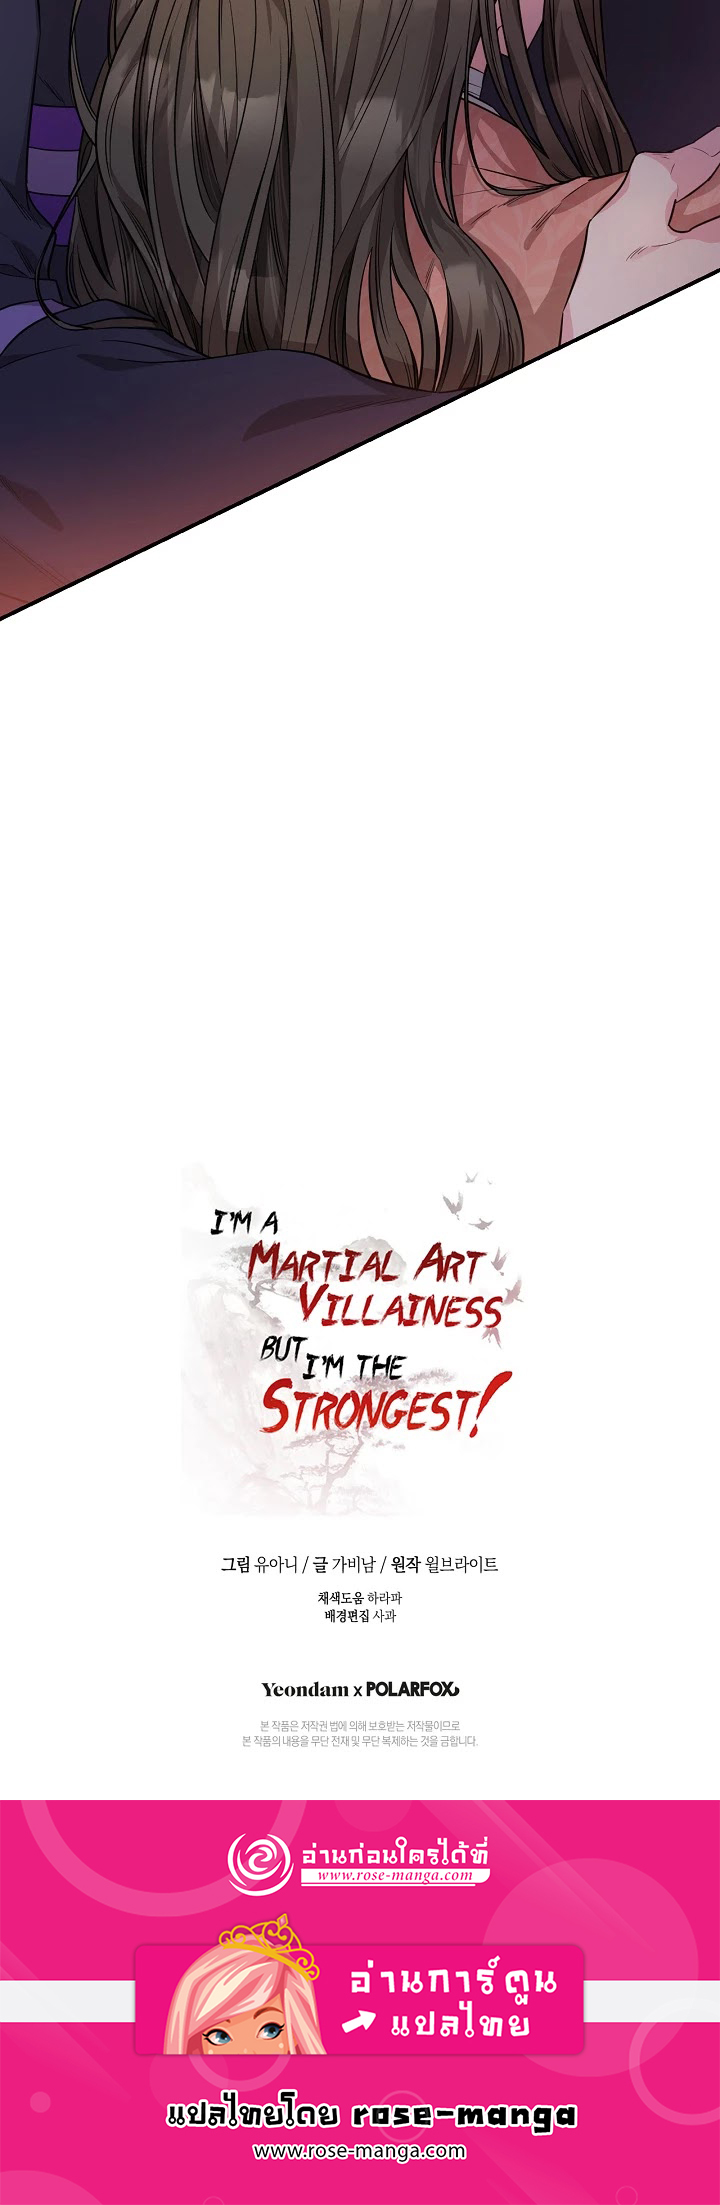 I’m a Martial Art Villainess, but I’m the Strongest! 57 53